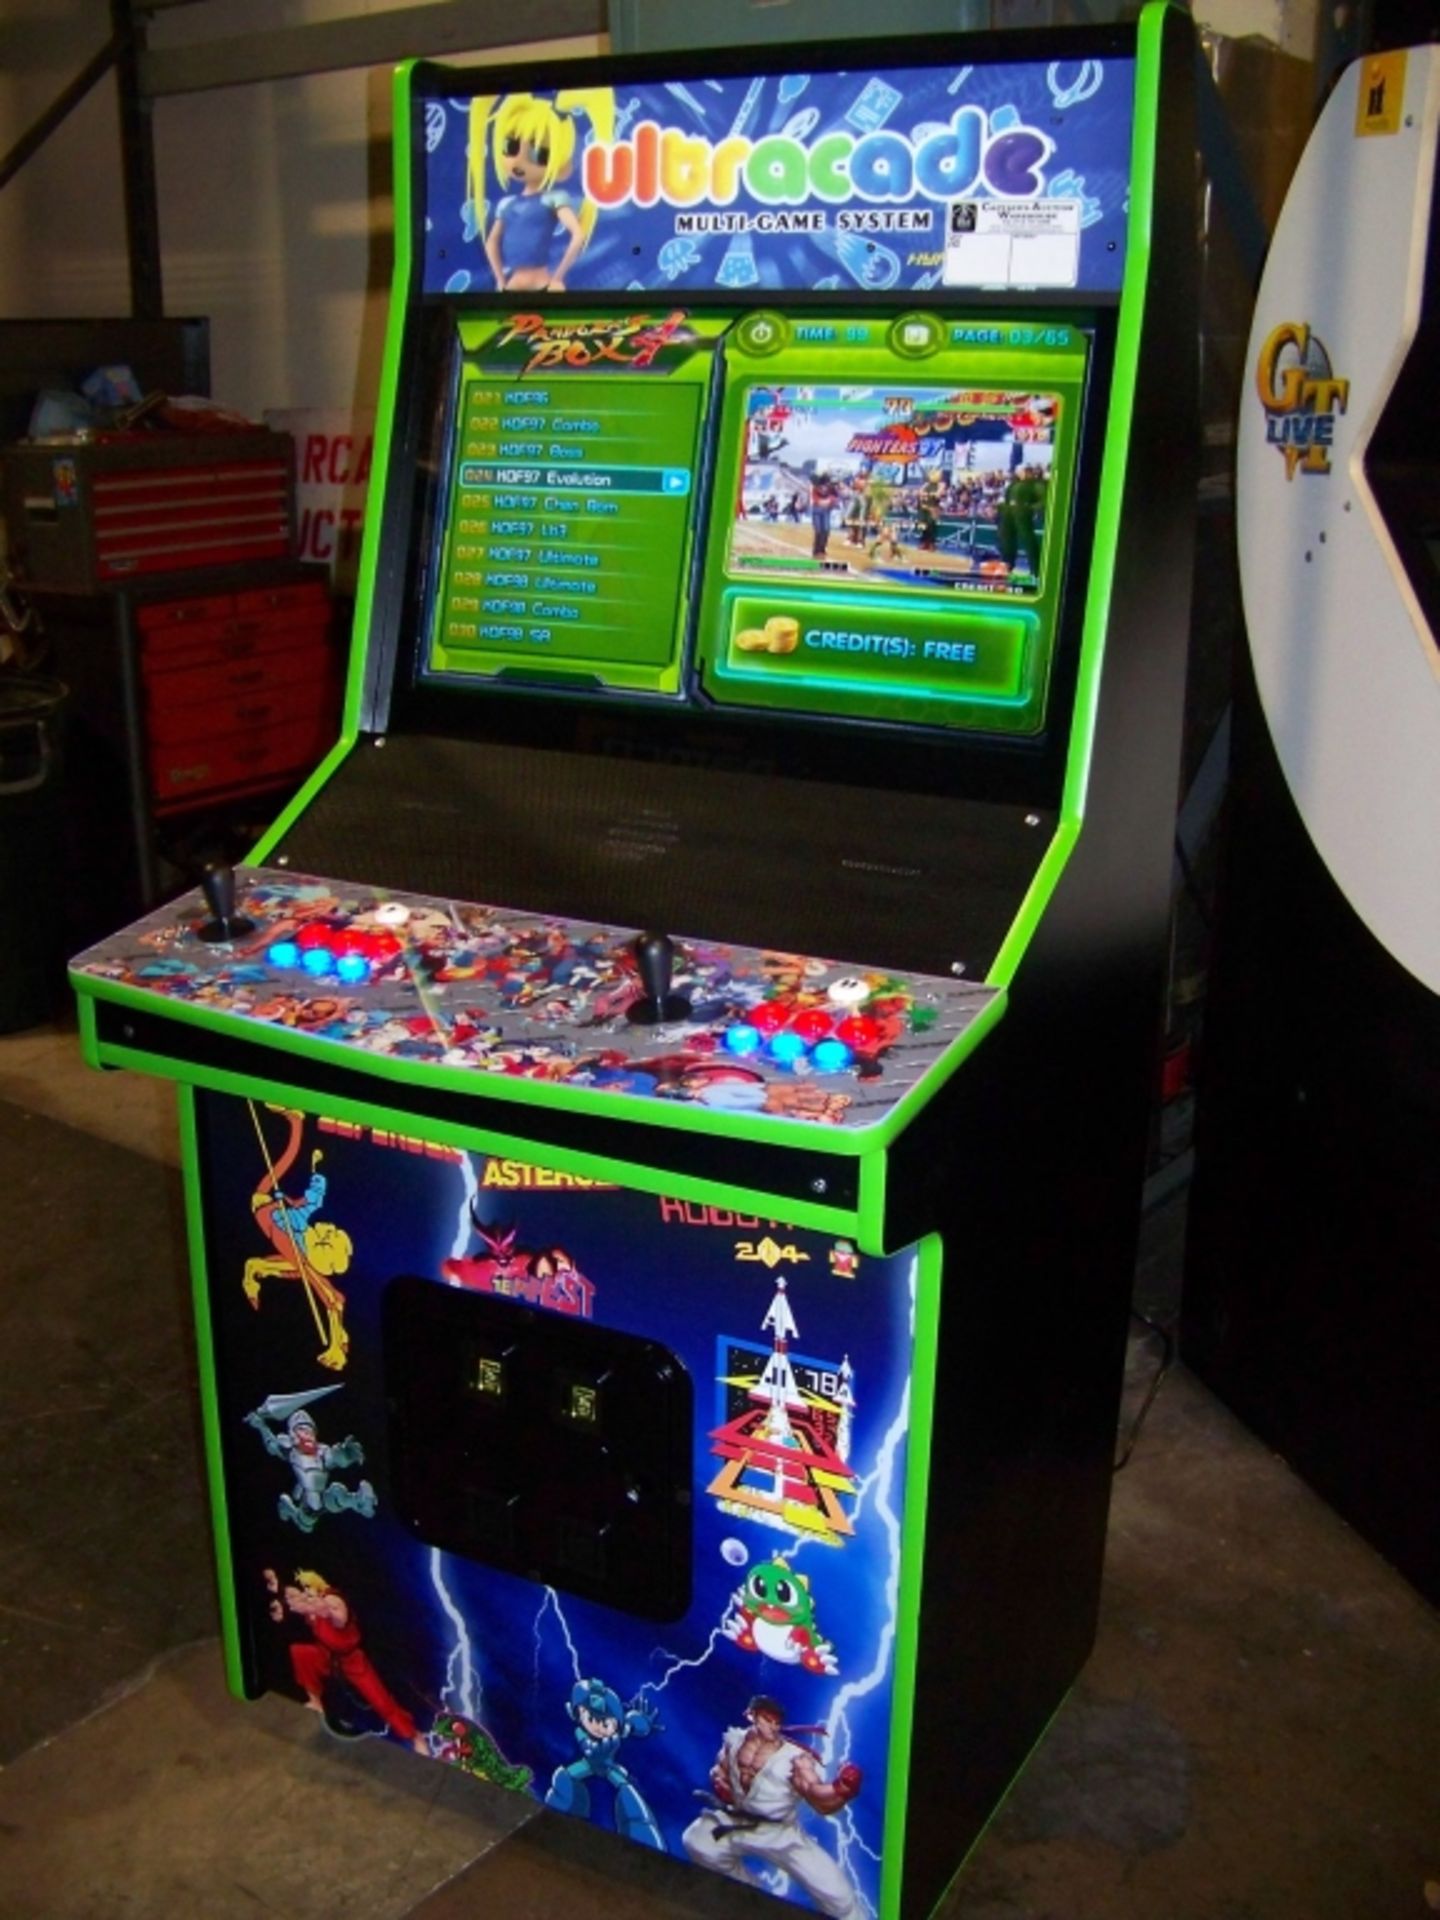 MULTICADE 615 IN 1 ARCADE GAMES UPRIGHT LCD L@@K!! - Image 2 of 8